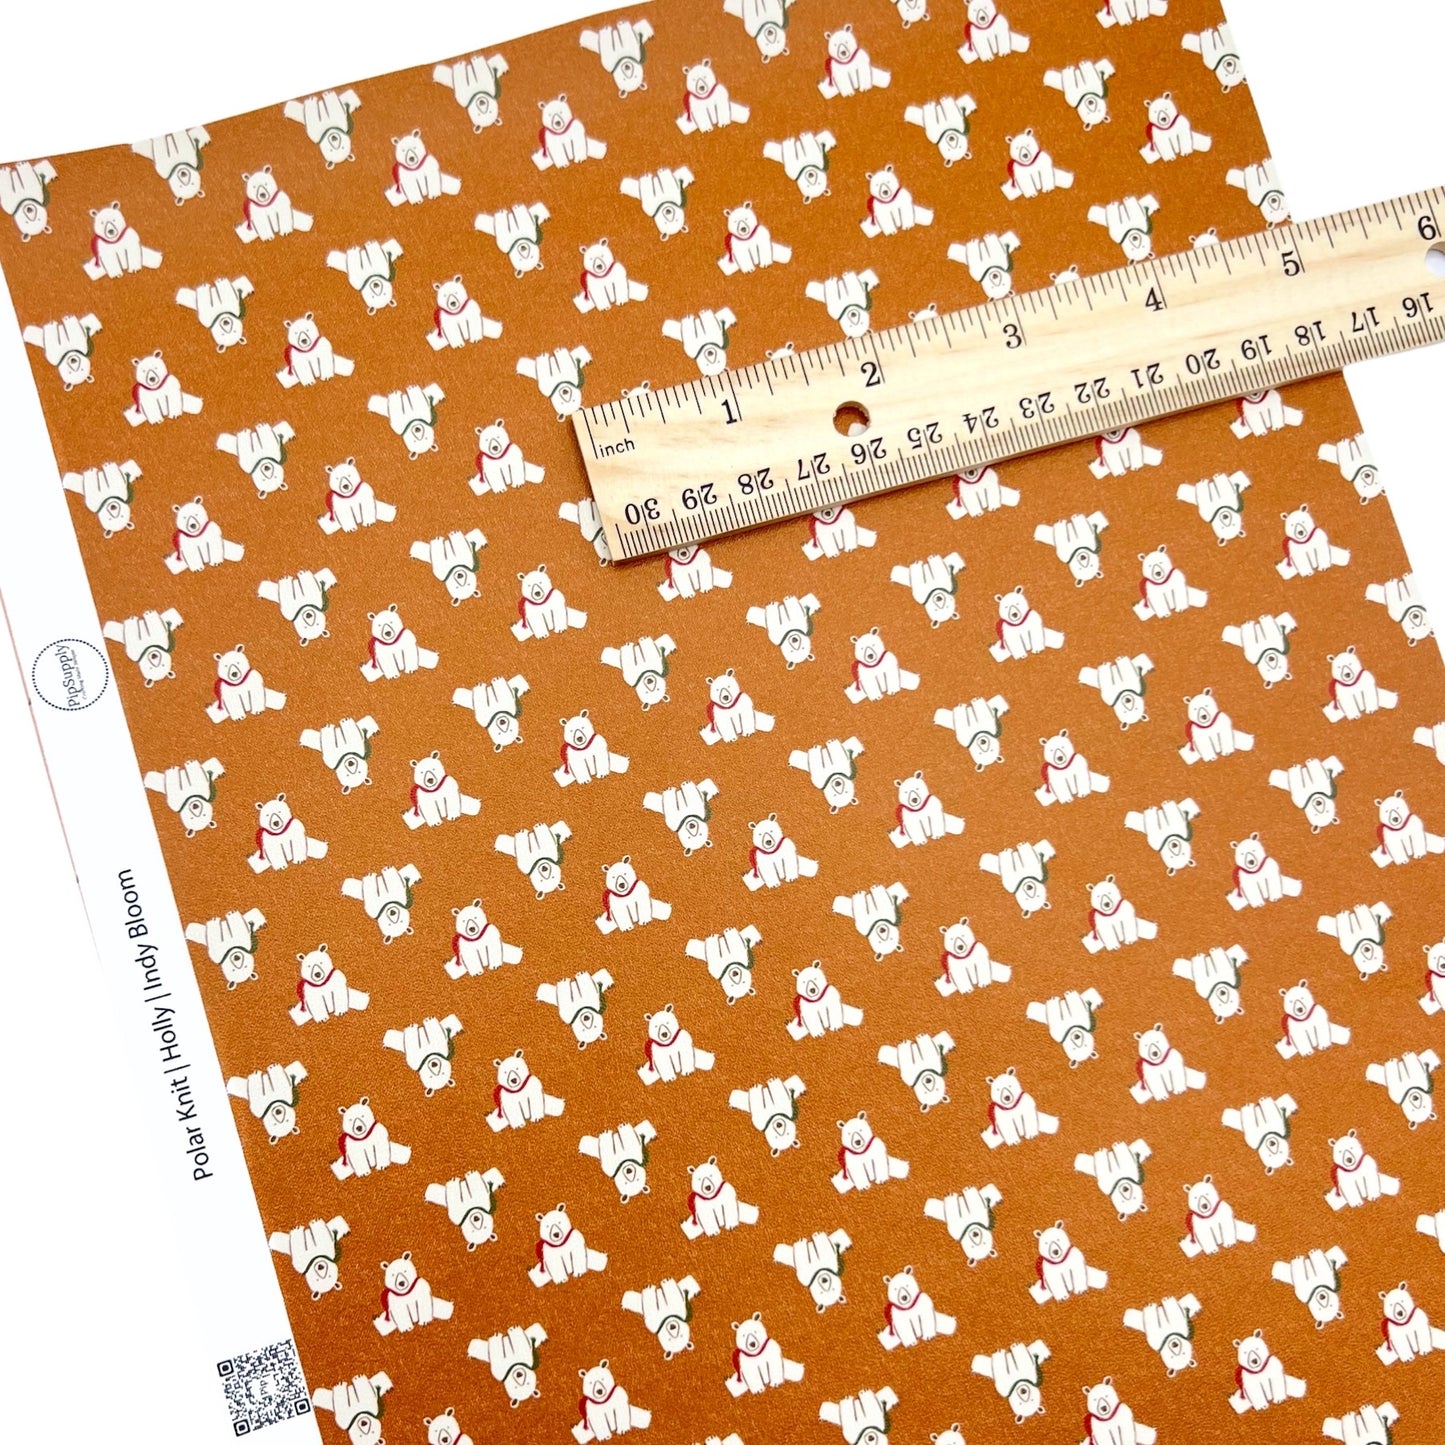 Rolled or individual christmas faux leather sheet with polar bears on an orange background